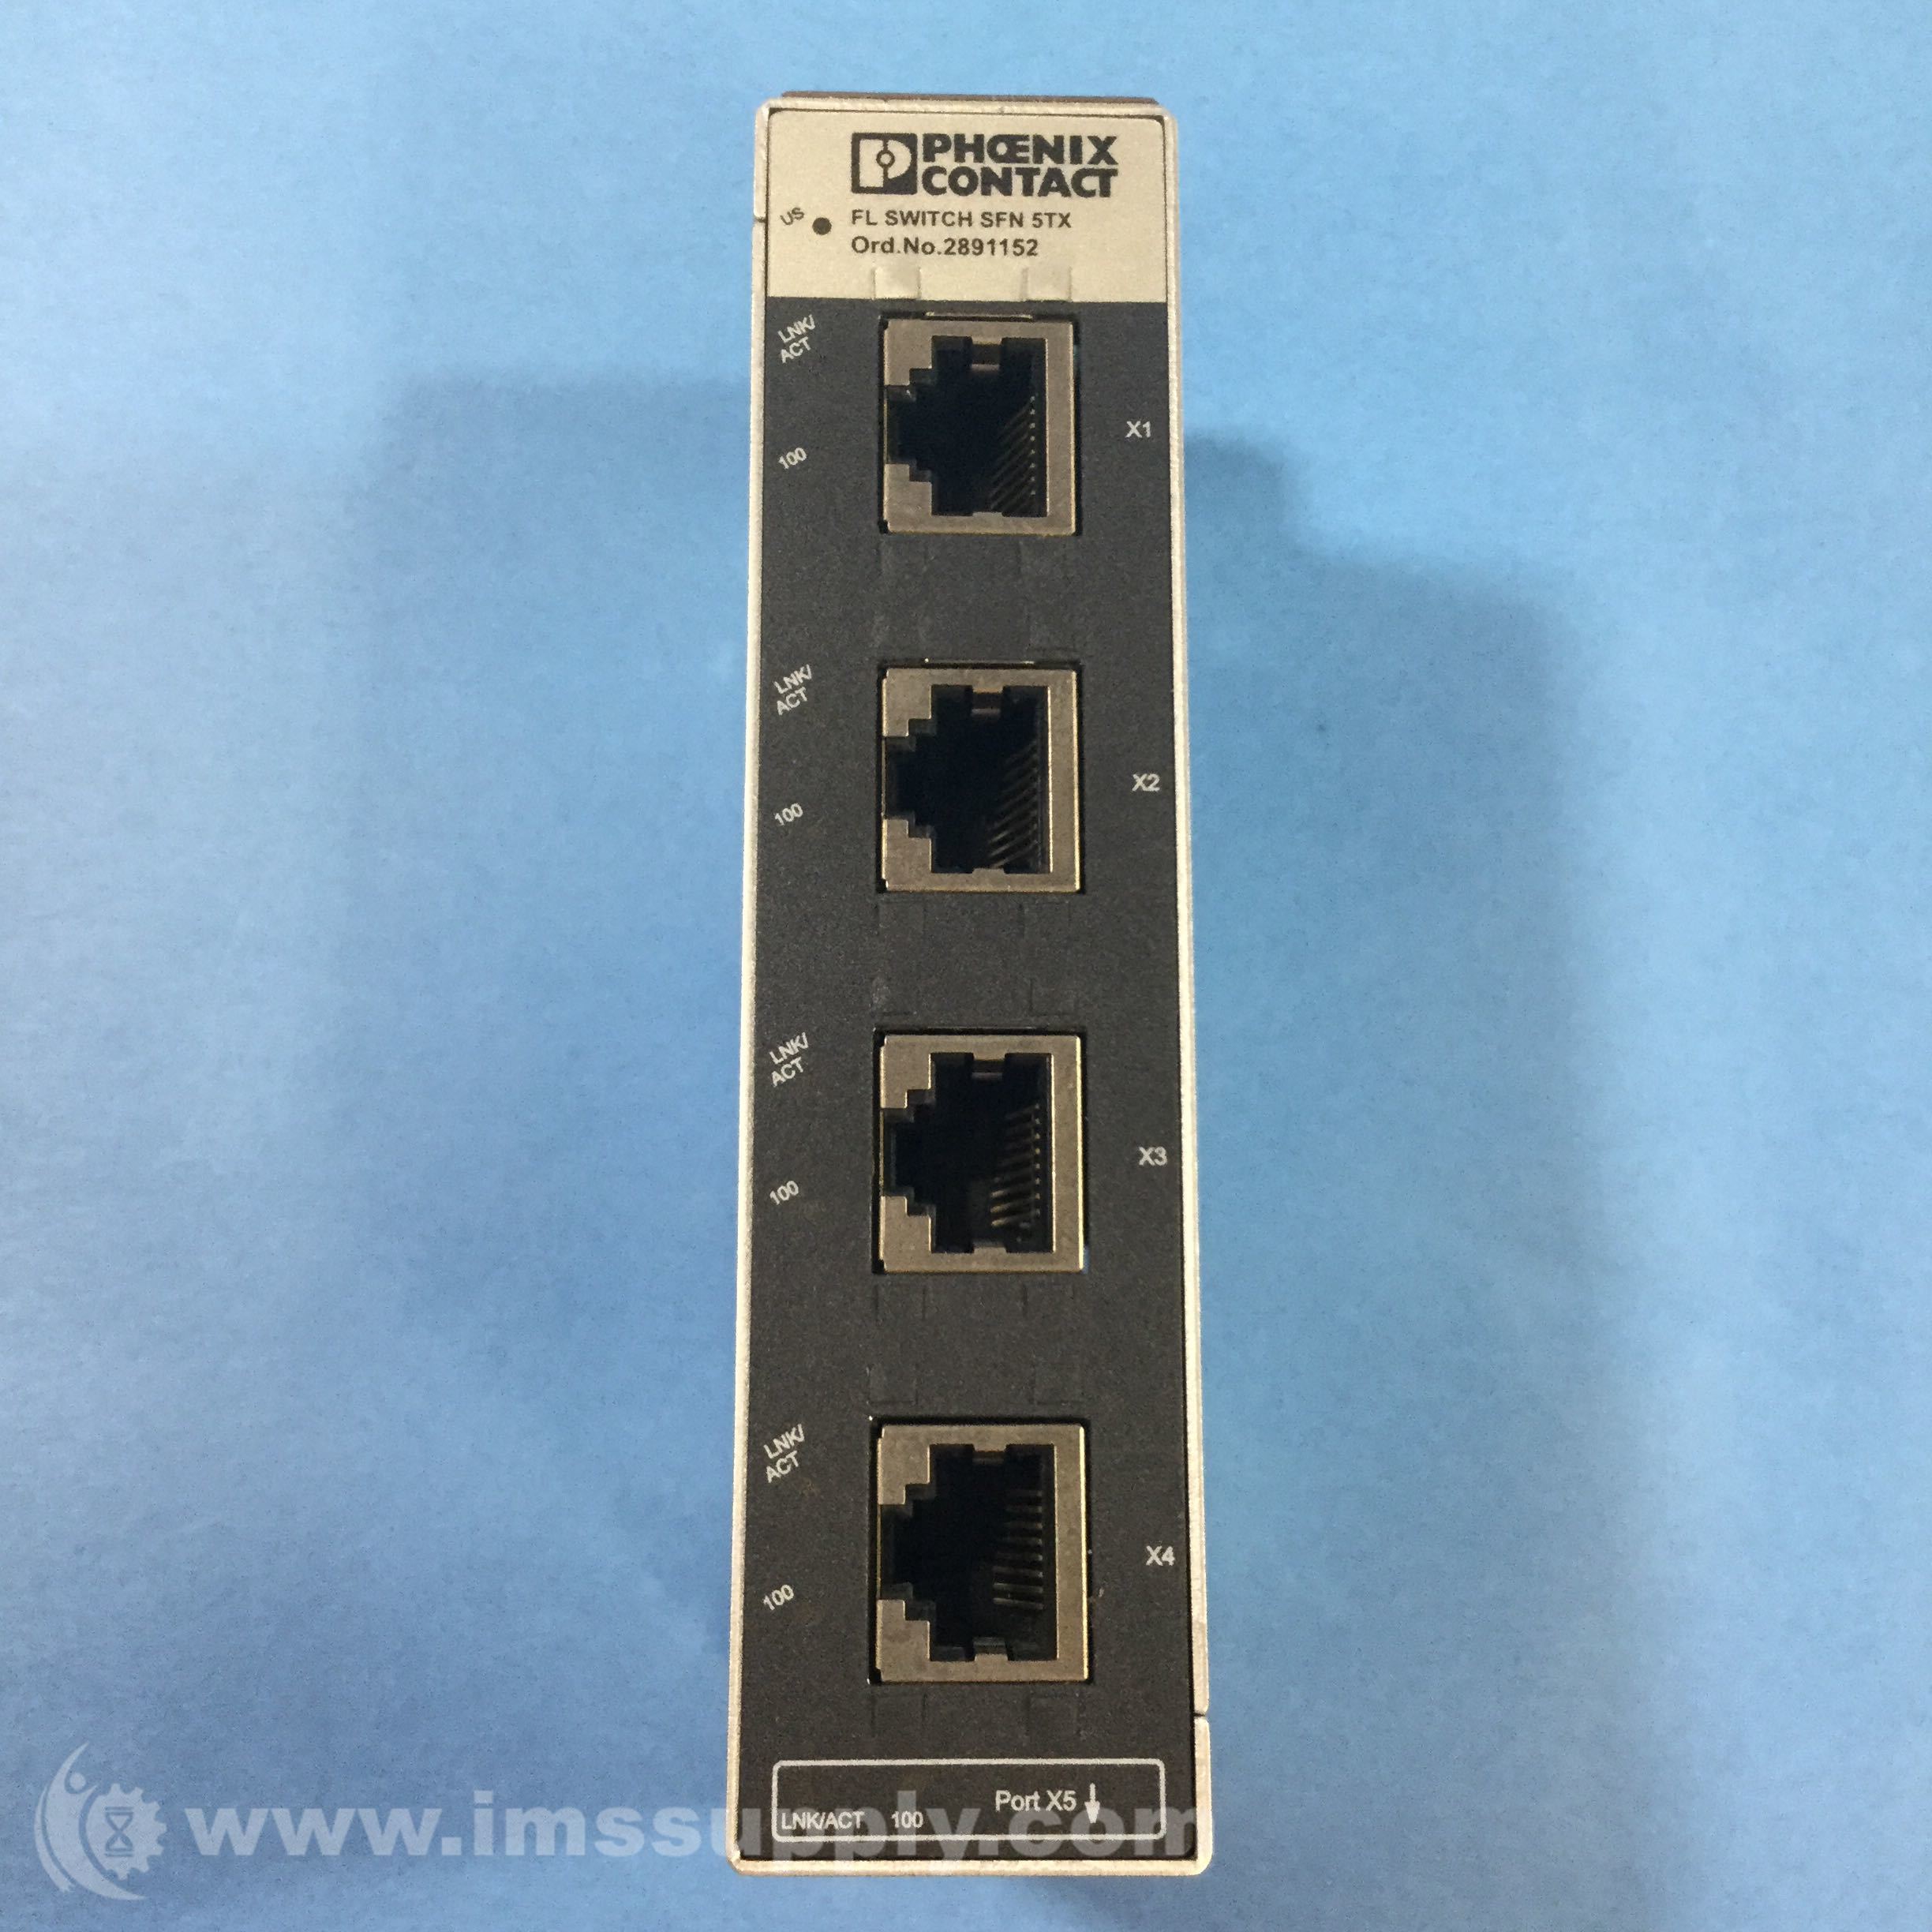 Phoenix Contact 2891152 Ethernet Switch FL Switch SFN 5TX - IMS Supply